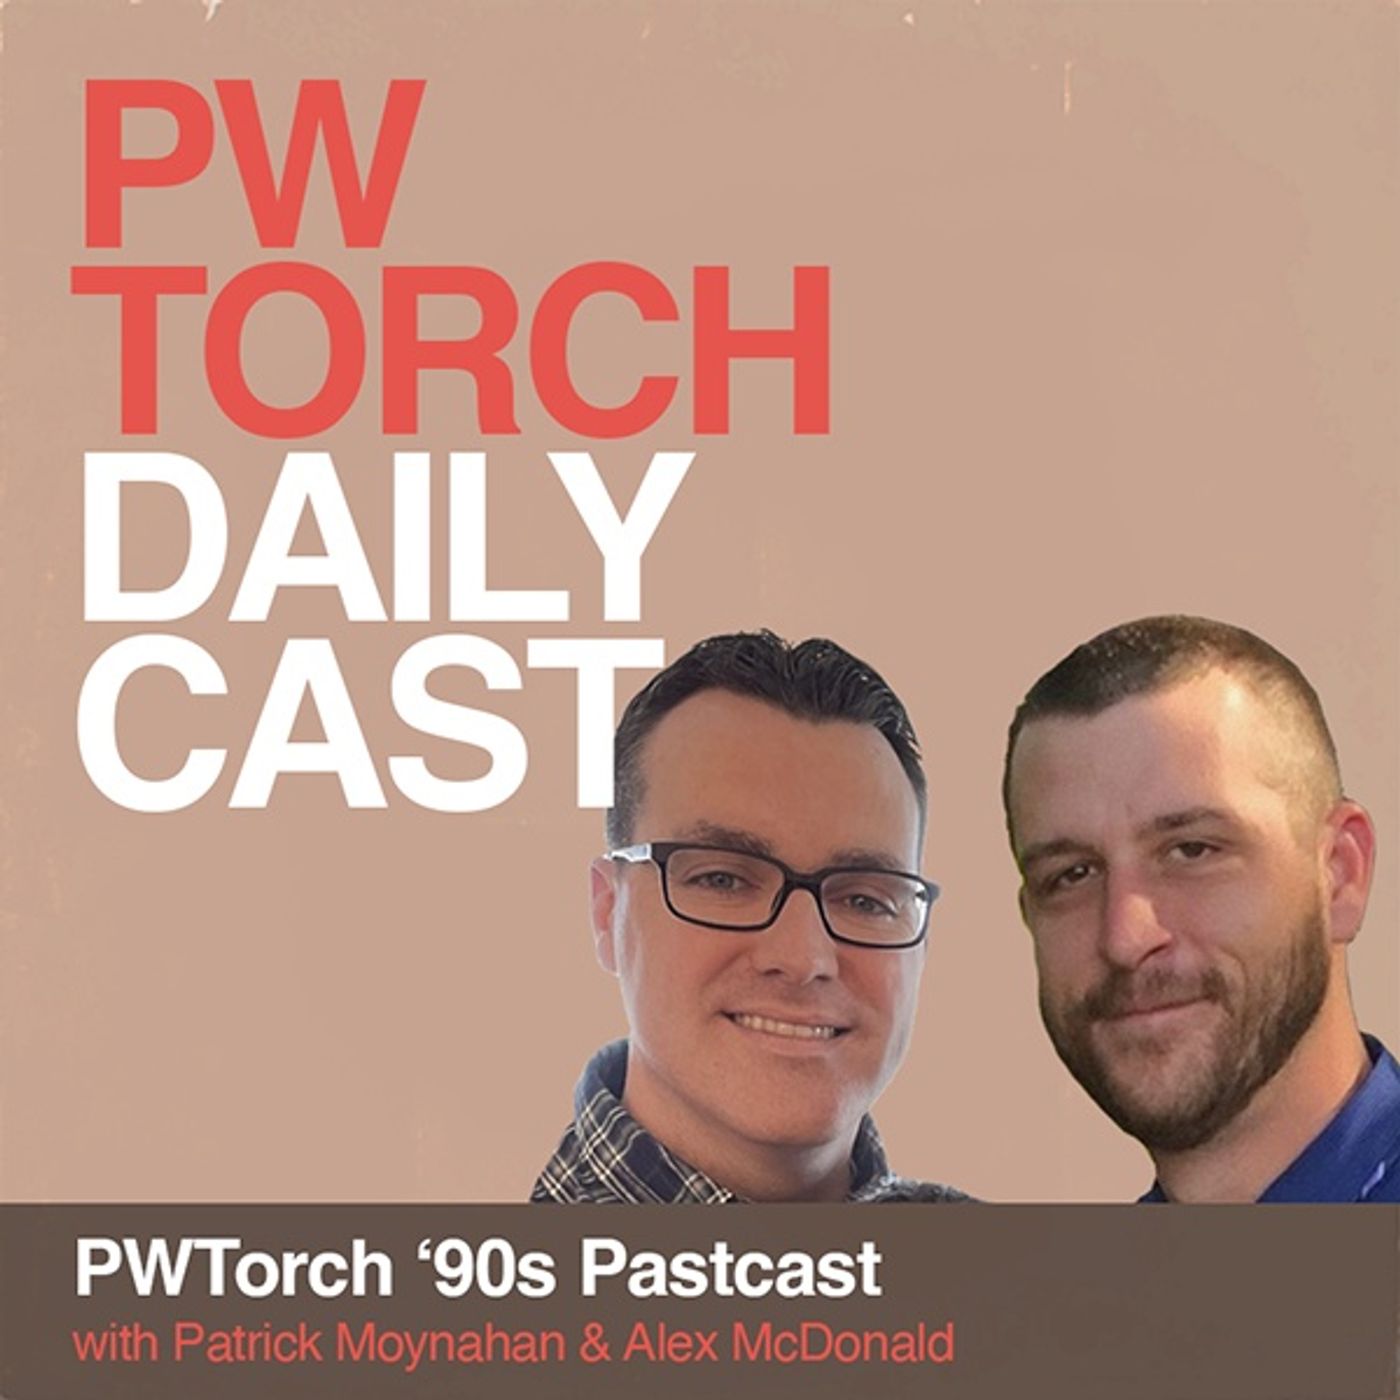 PWTorch ‘90s Pastcast - Moynahan & McDonald discuss PWTorch Newsletter #284 (6-18-94) including Hogan’s impact in WCW, Taker vs. Taker at SS